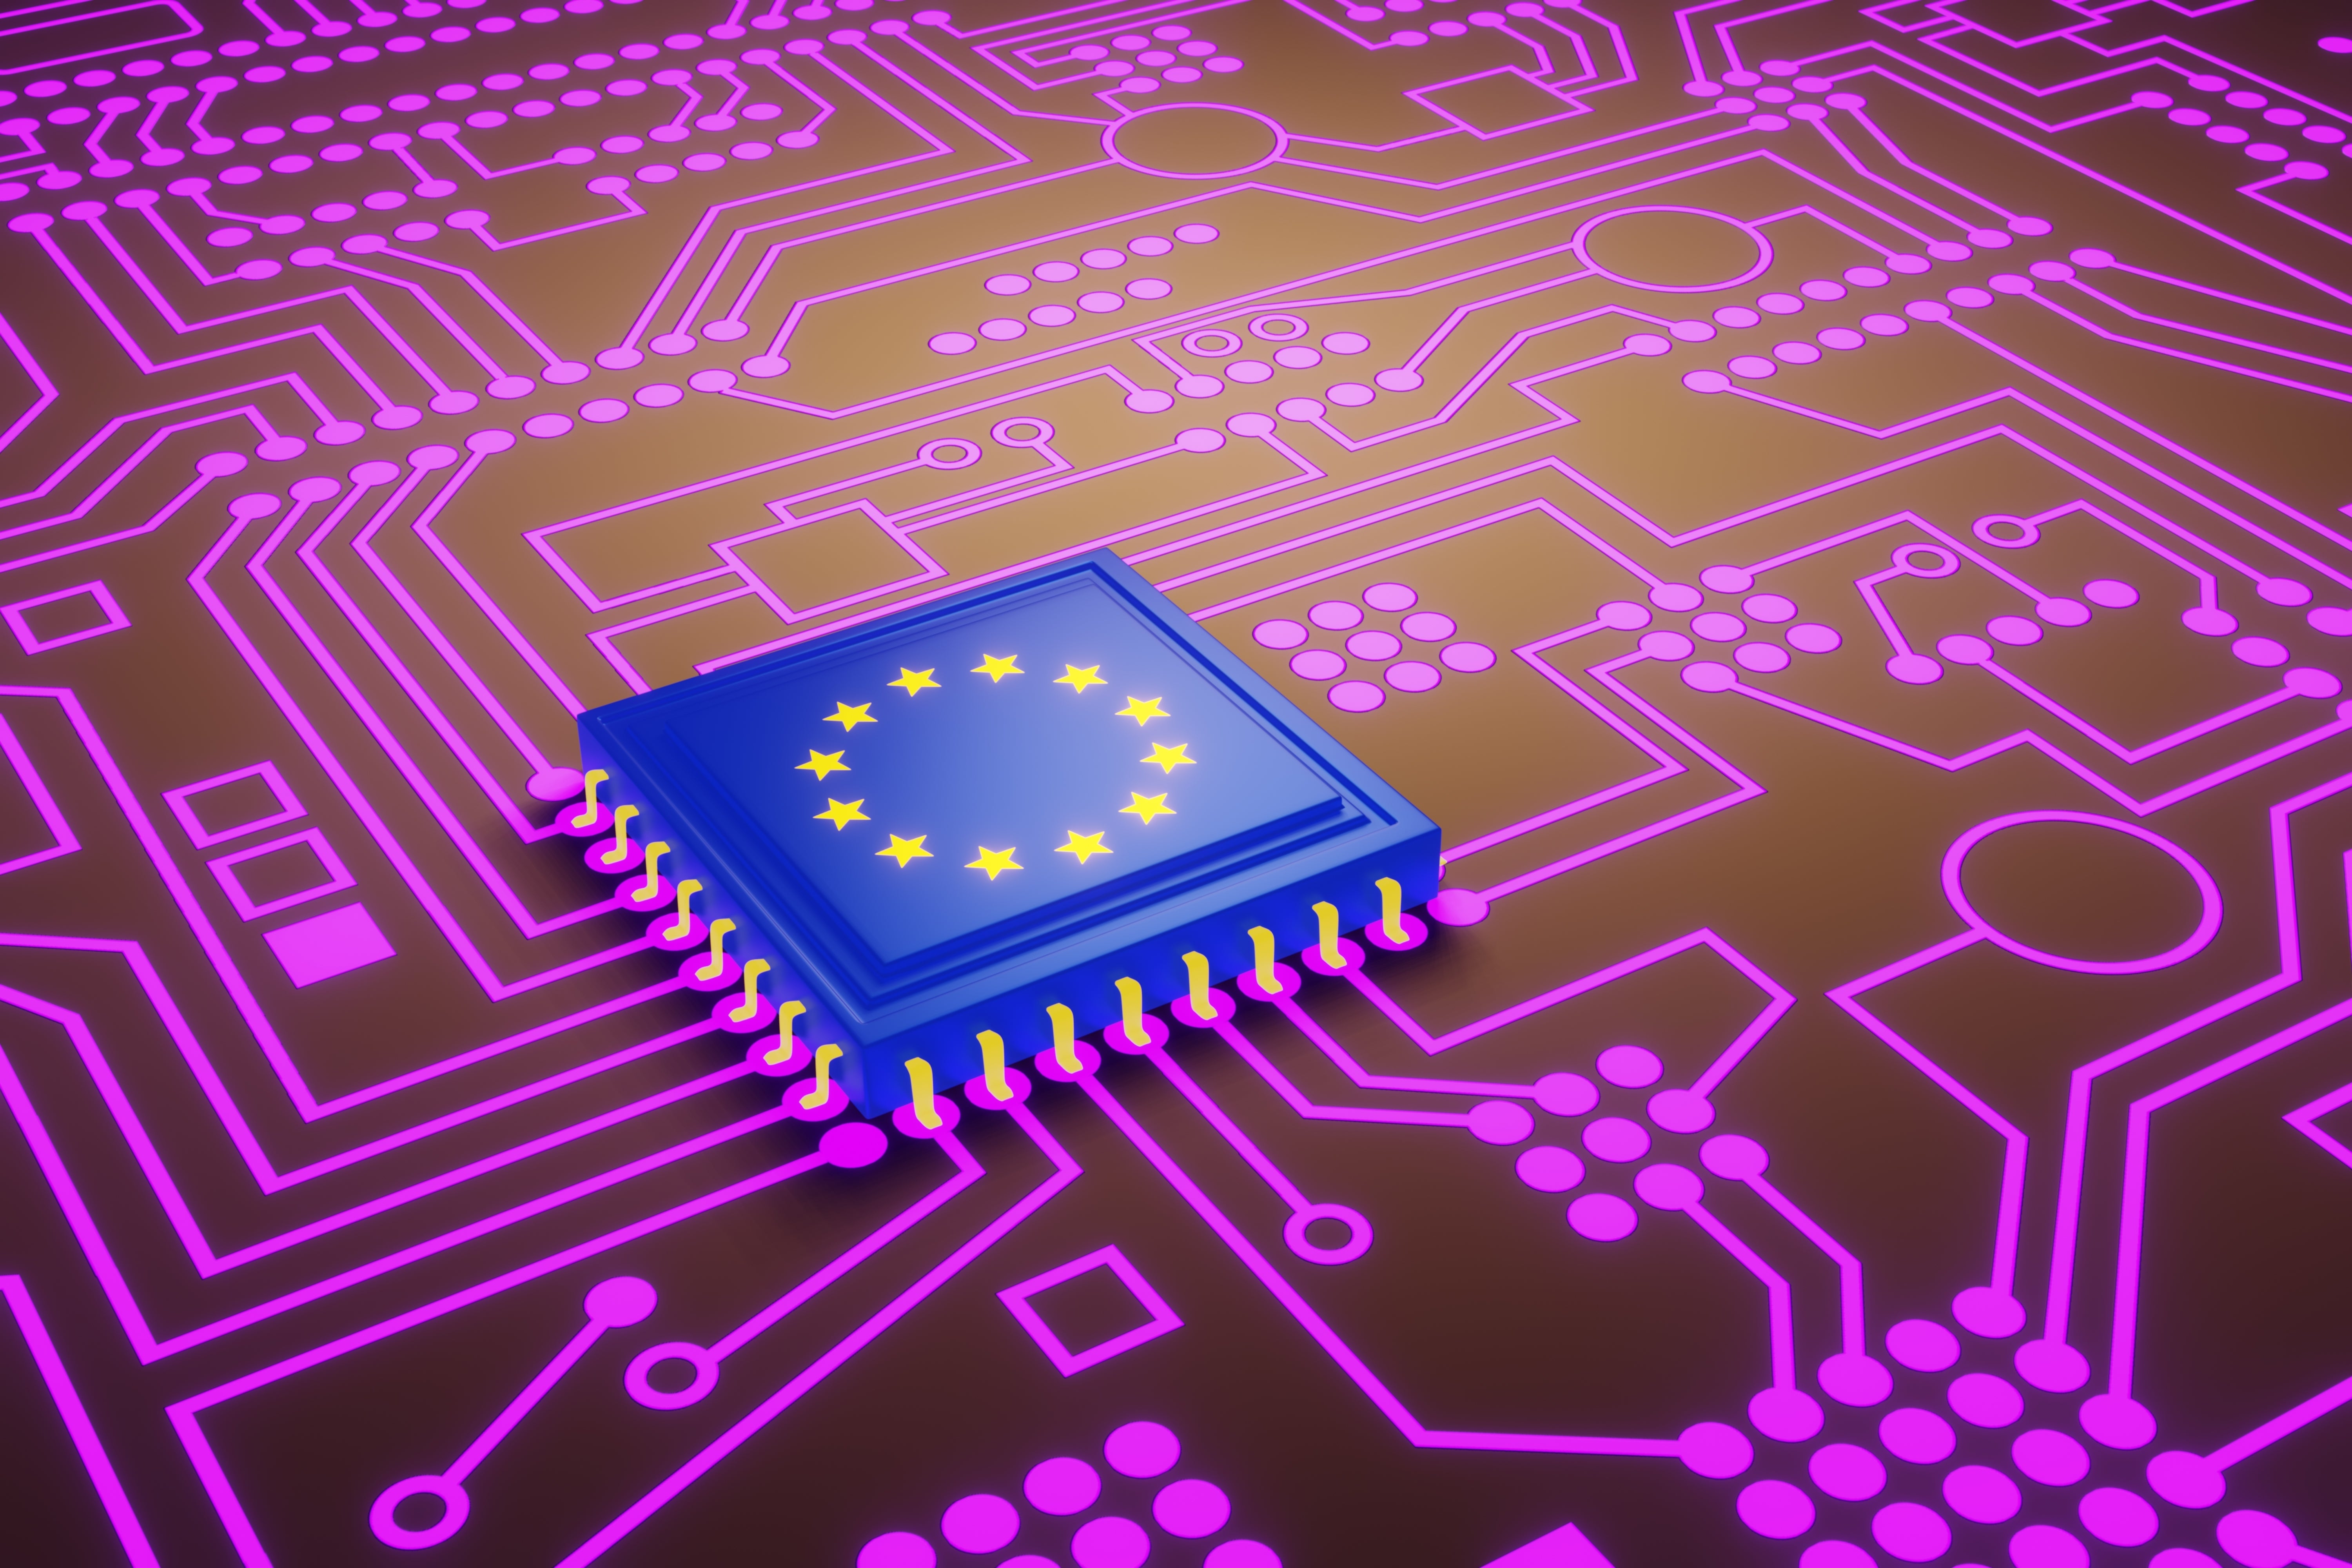 Purple circuit board with blue chip showing European flag comprising circle of yellow stars